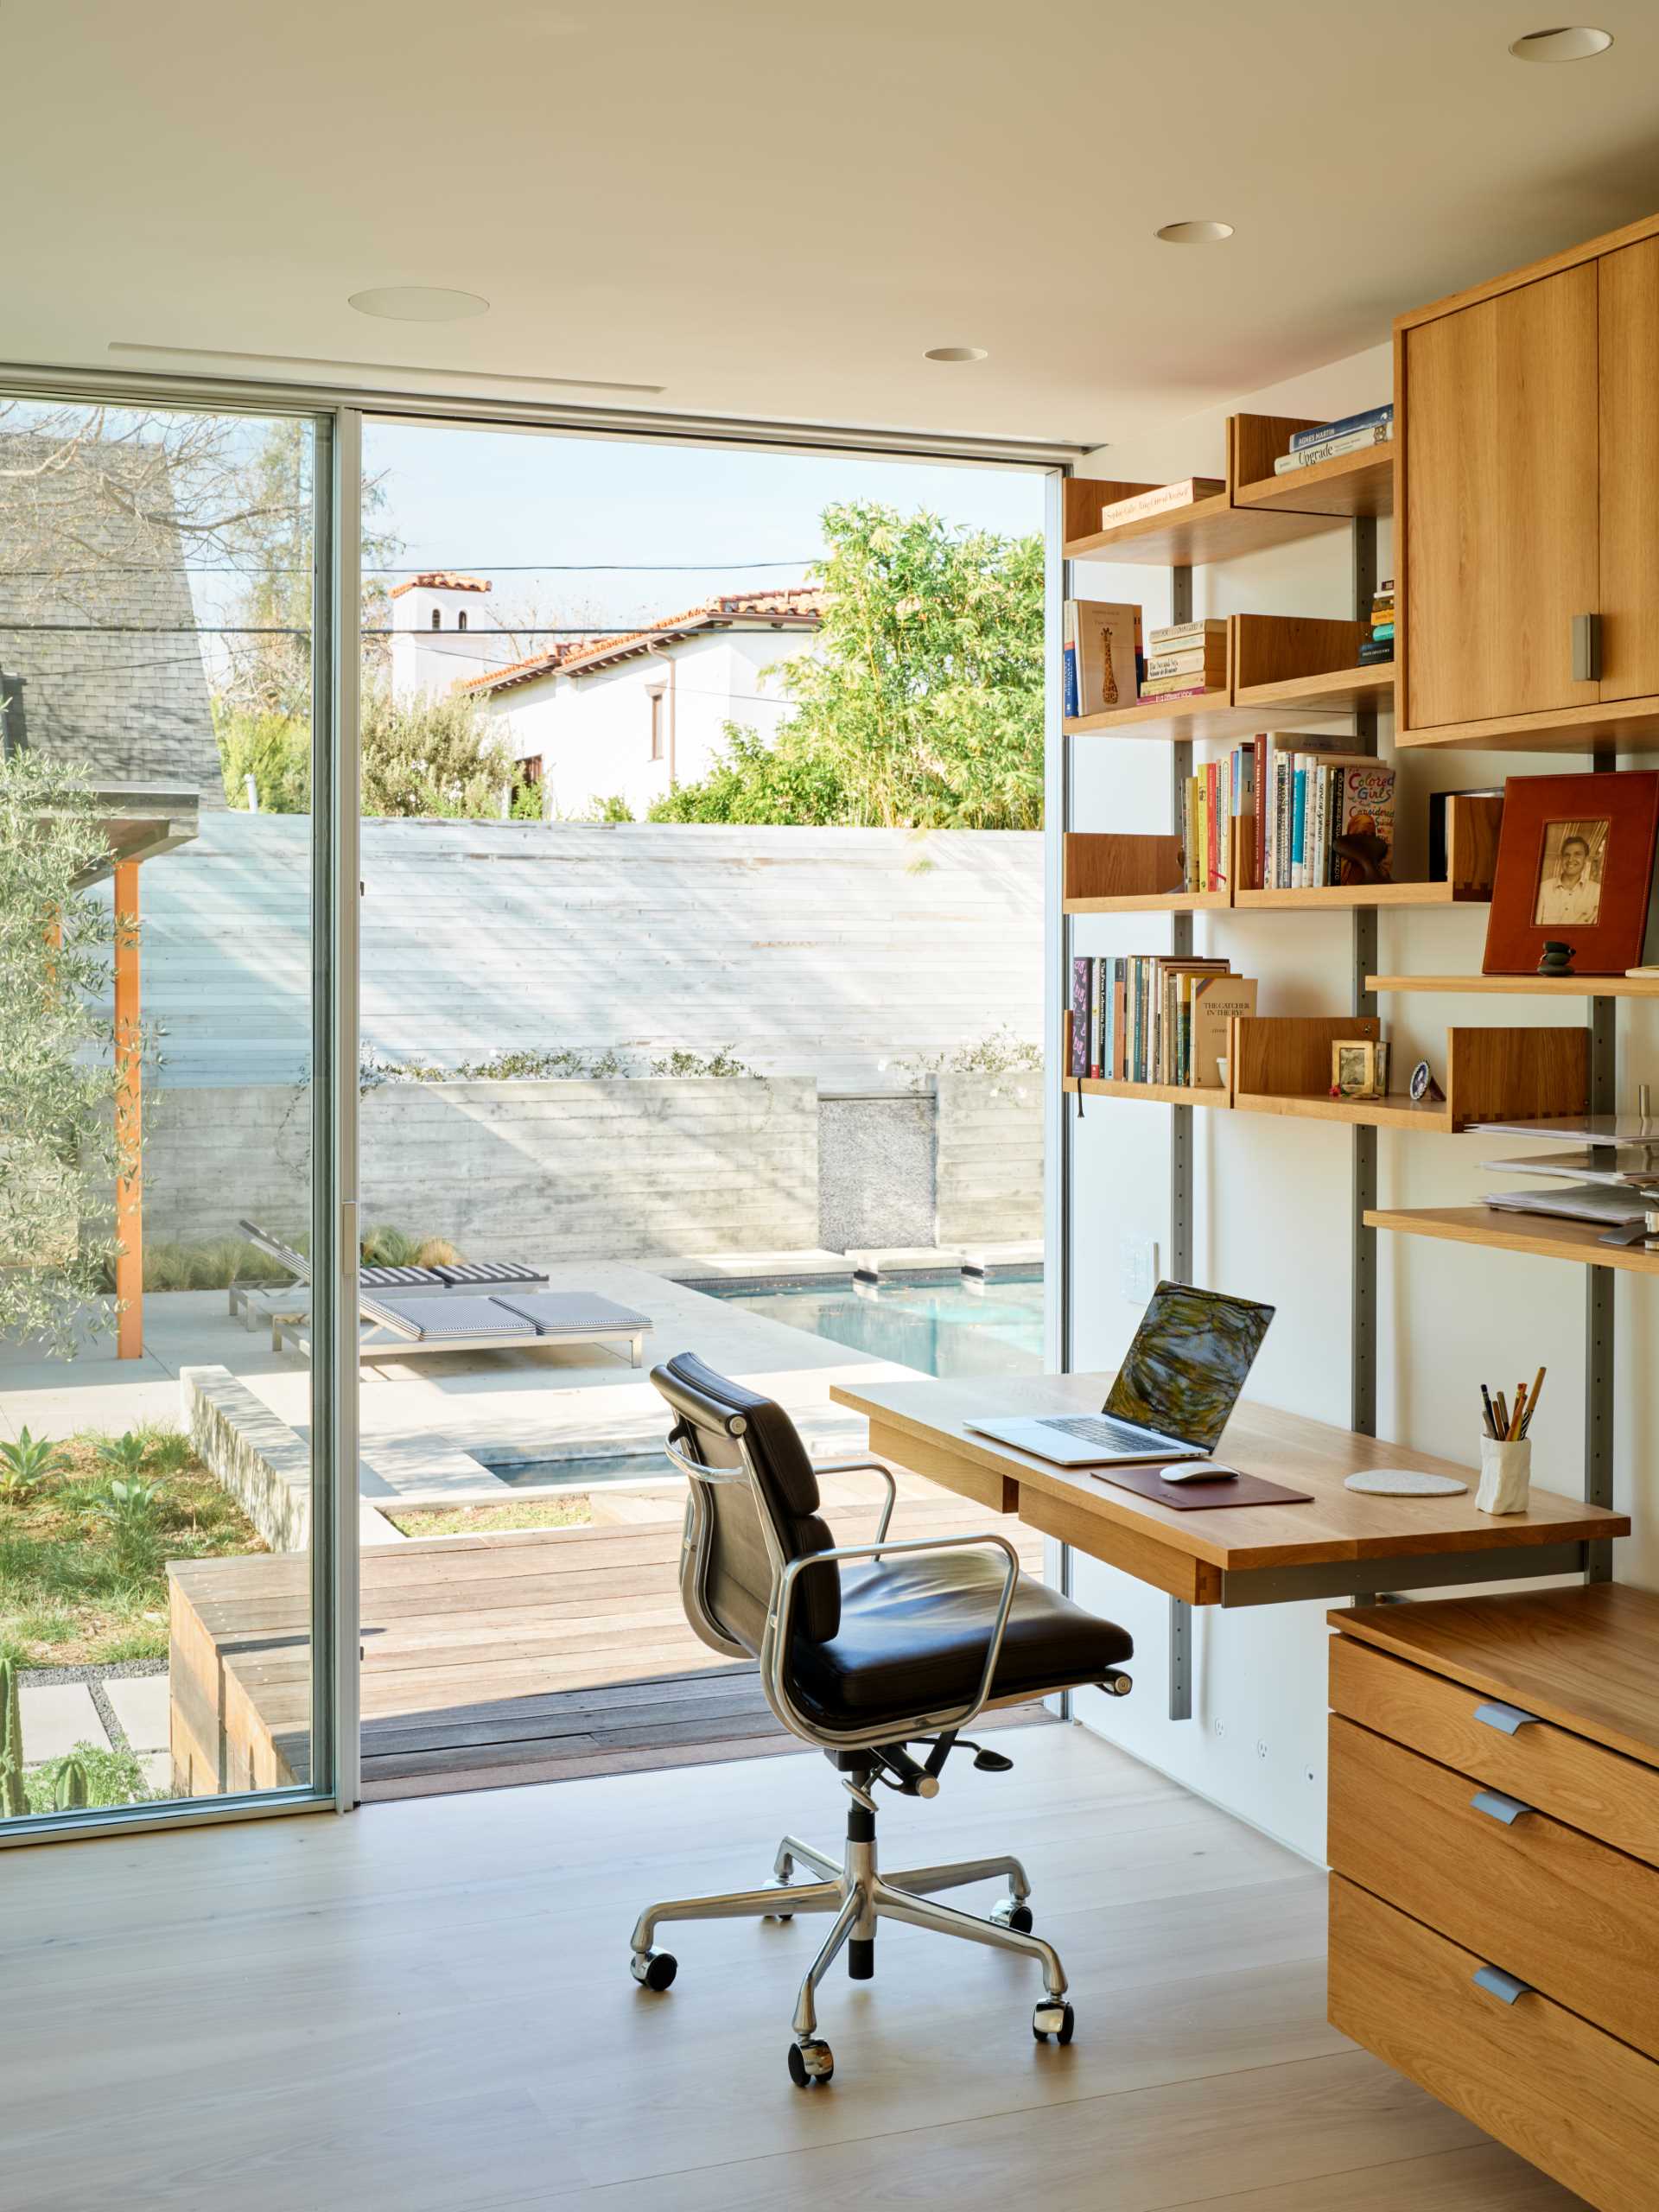 A modern home office with a wall mounted desk and wood shelving.